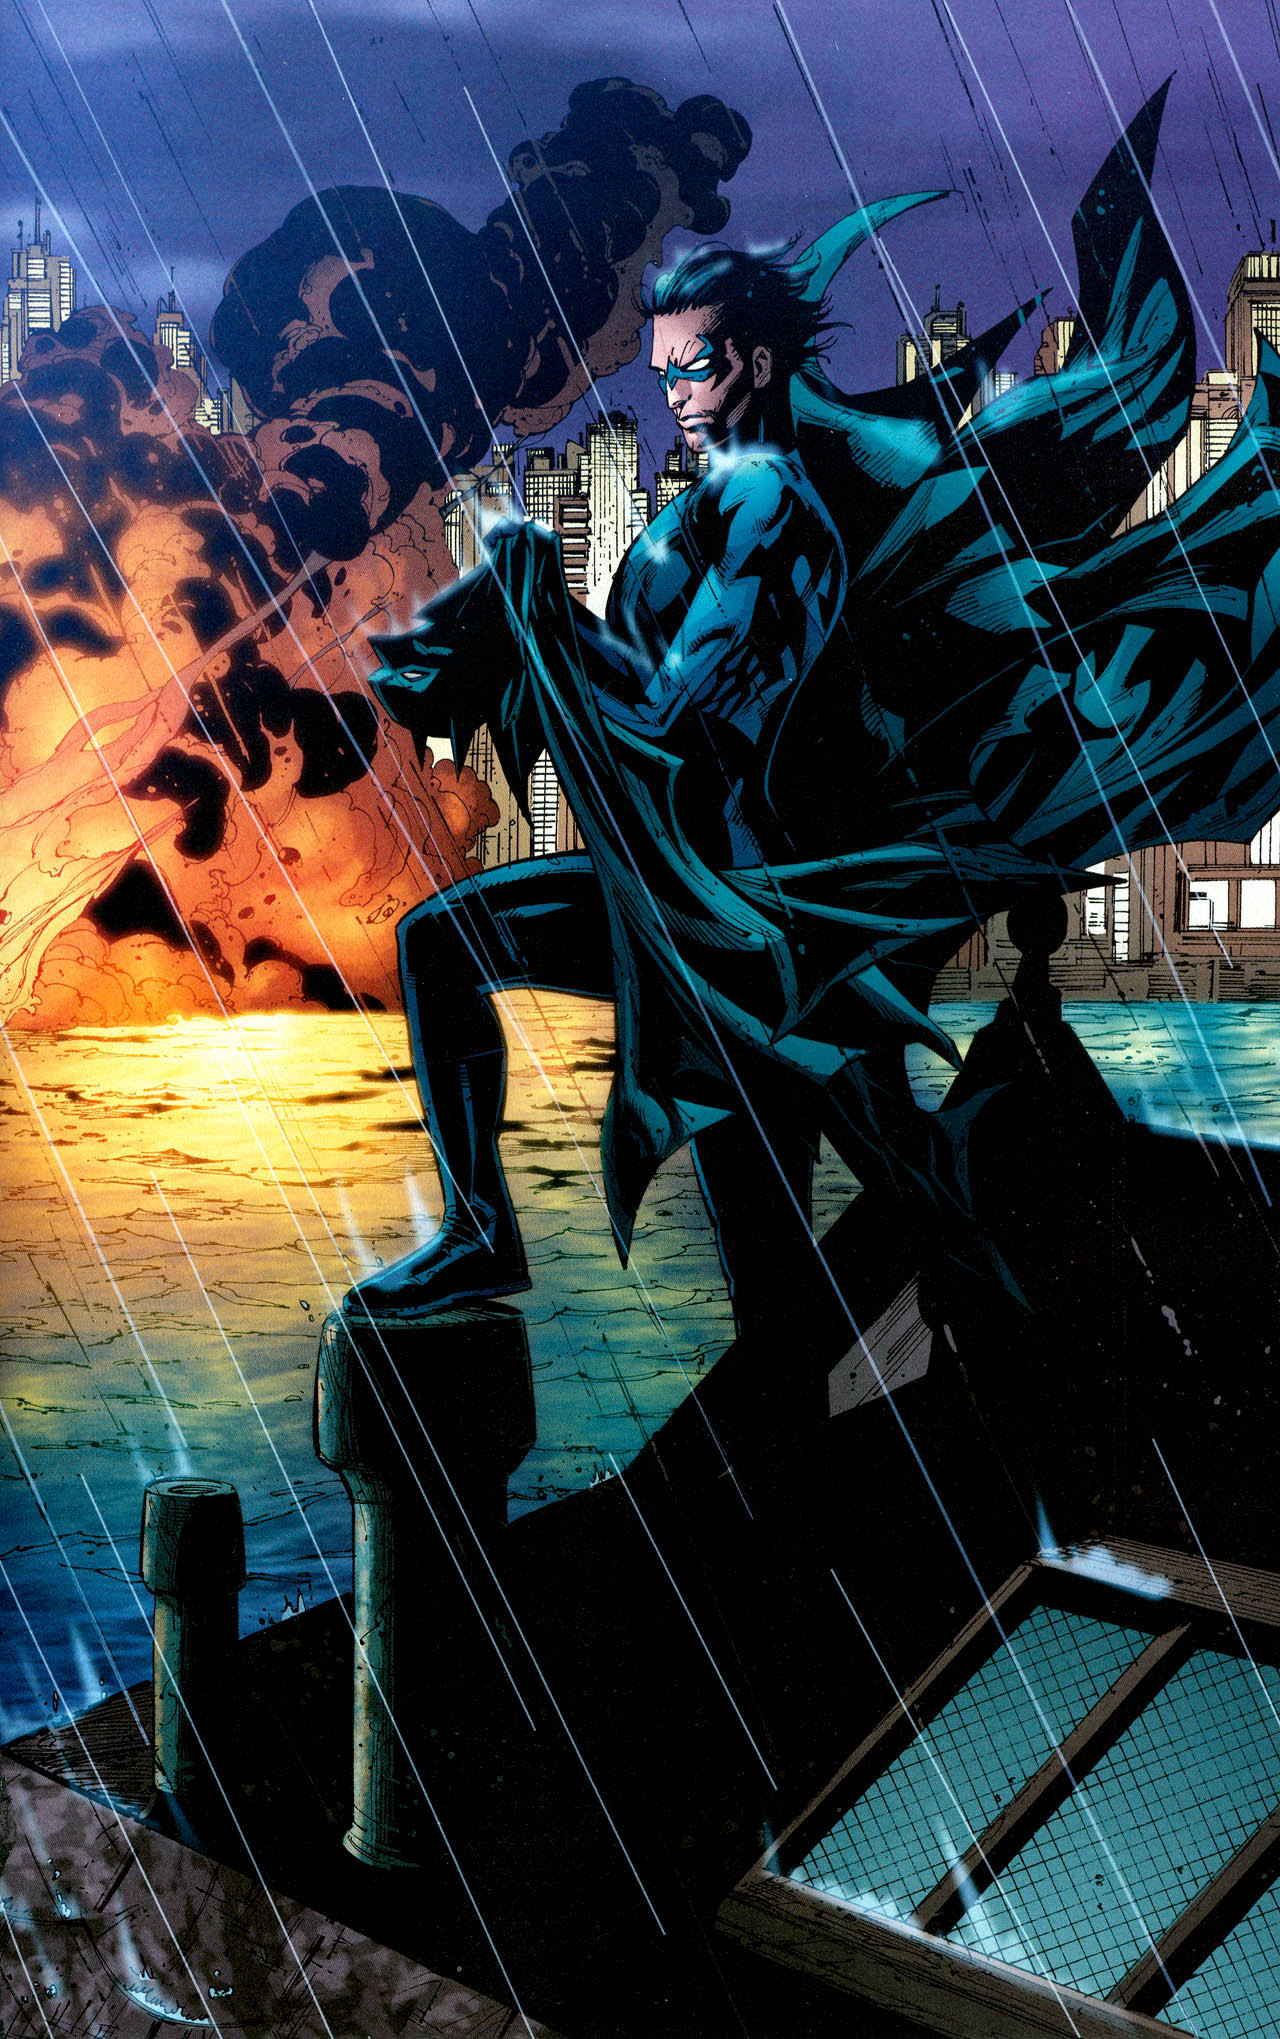 1280x2039 1920x1080 HD Quality Live Nightwing Backgrounds - Lamonica Sponaugle for PC  & Mac, Laptop, Tablet, Mobile Phone